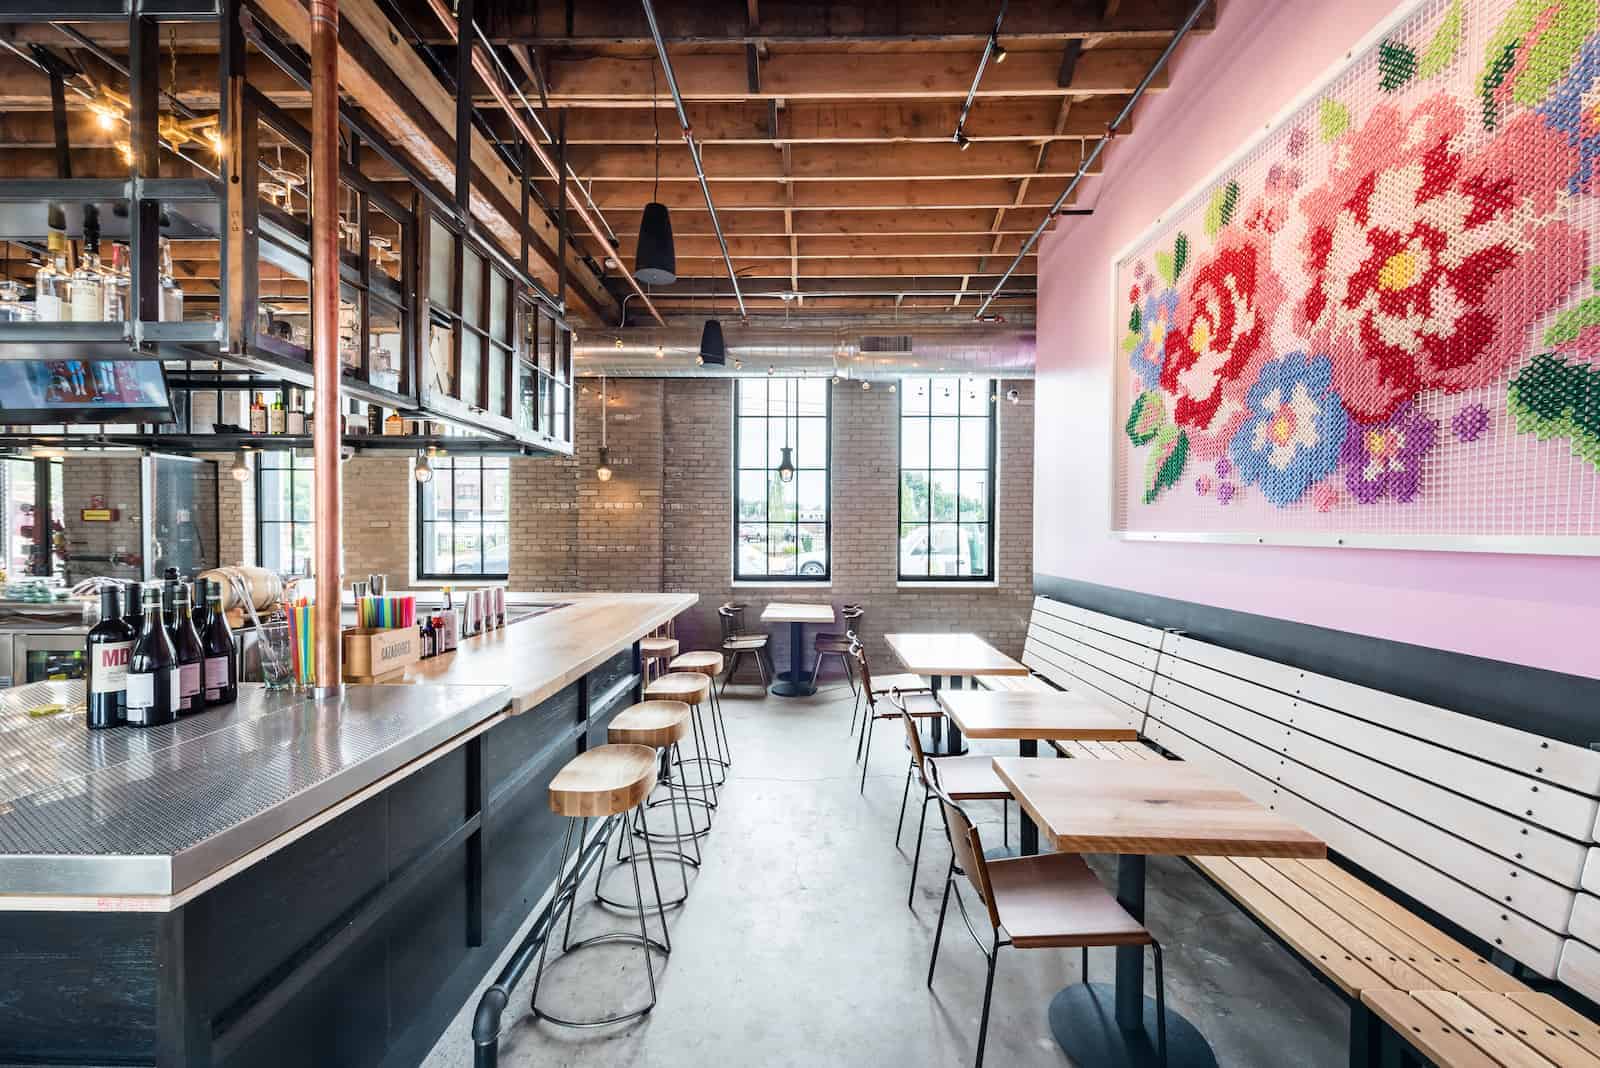 Read more about the article Fire-Retardant Fabrics for a Fiery Taqueria in Minneapolis